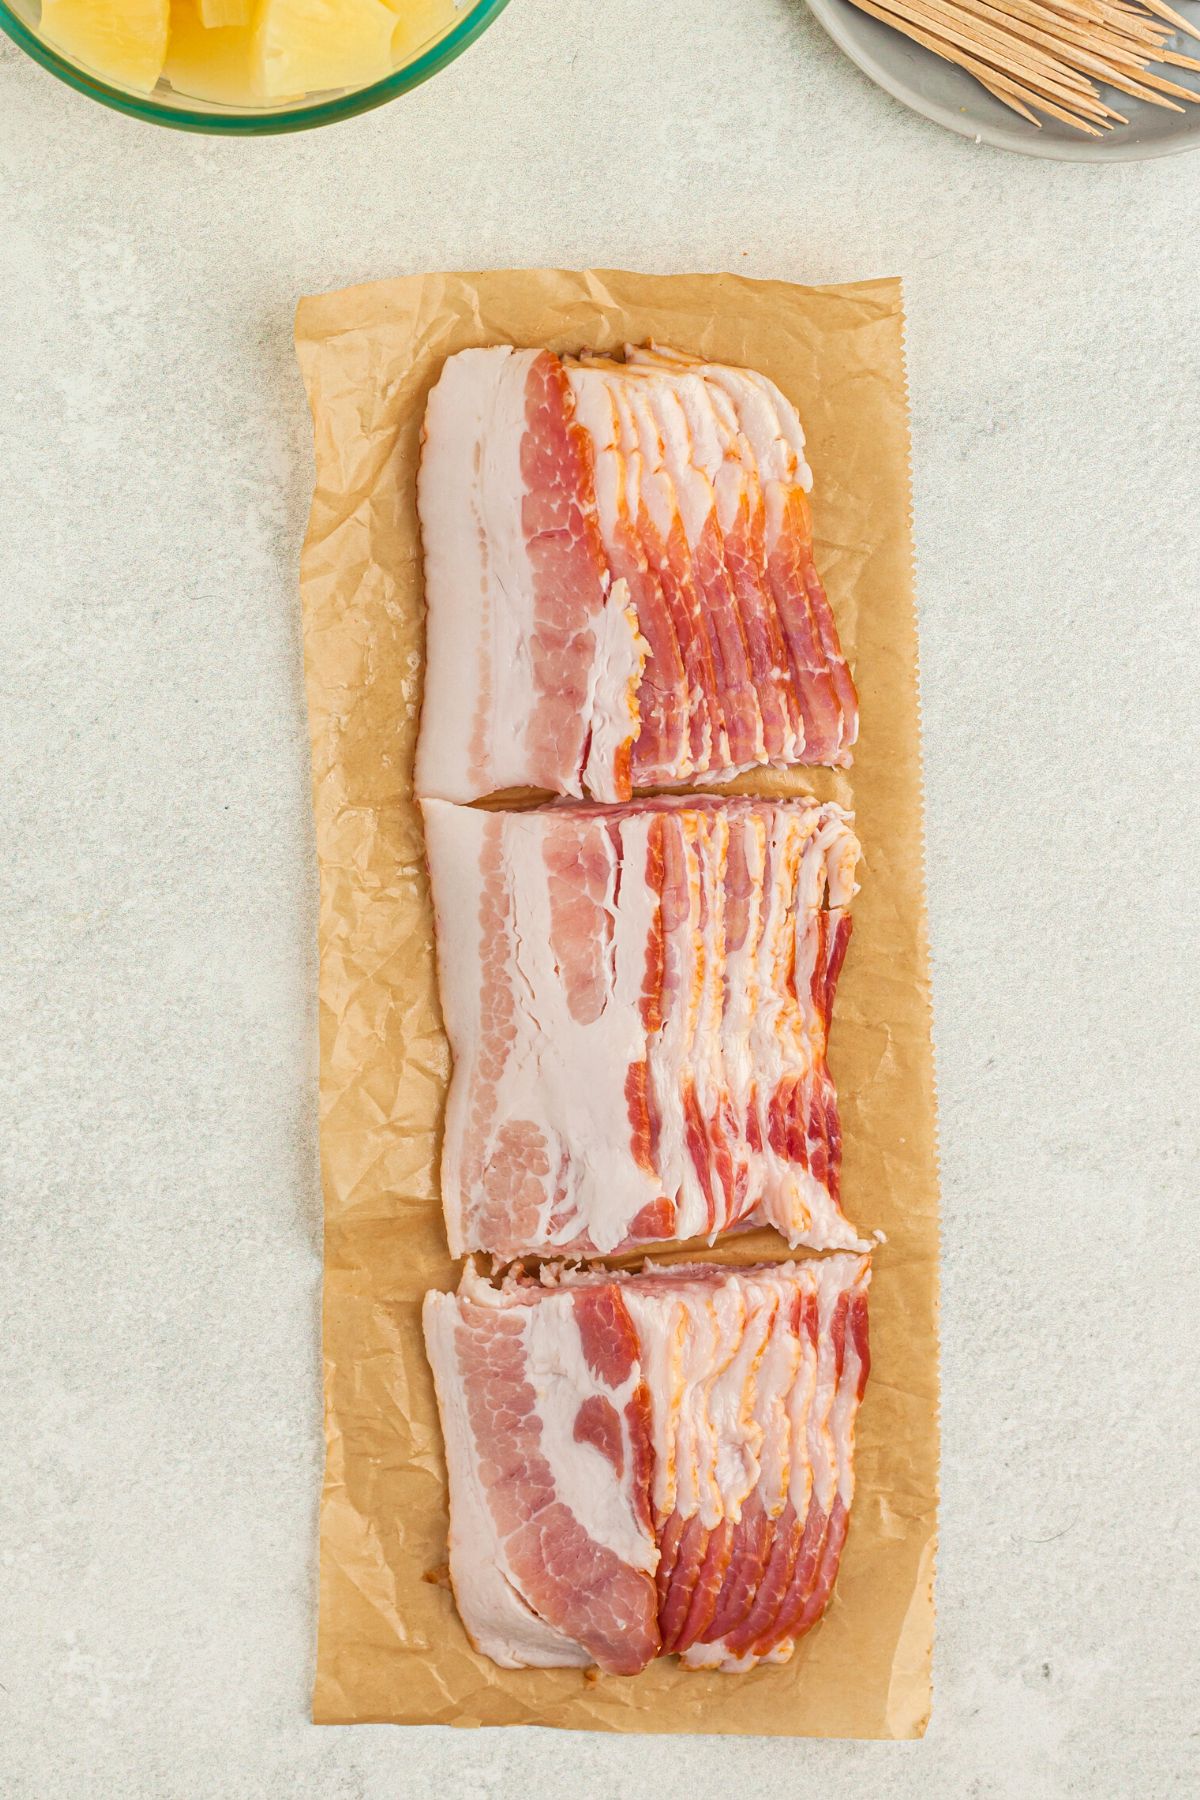 Bacon slices cut into thirds on parchment paper